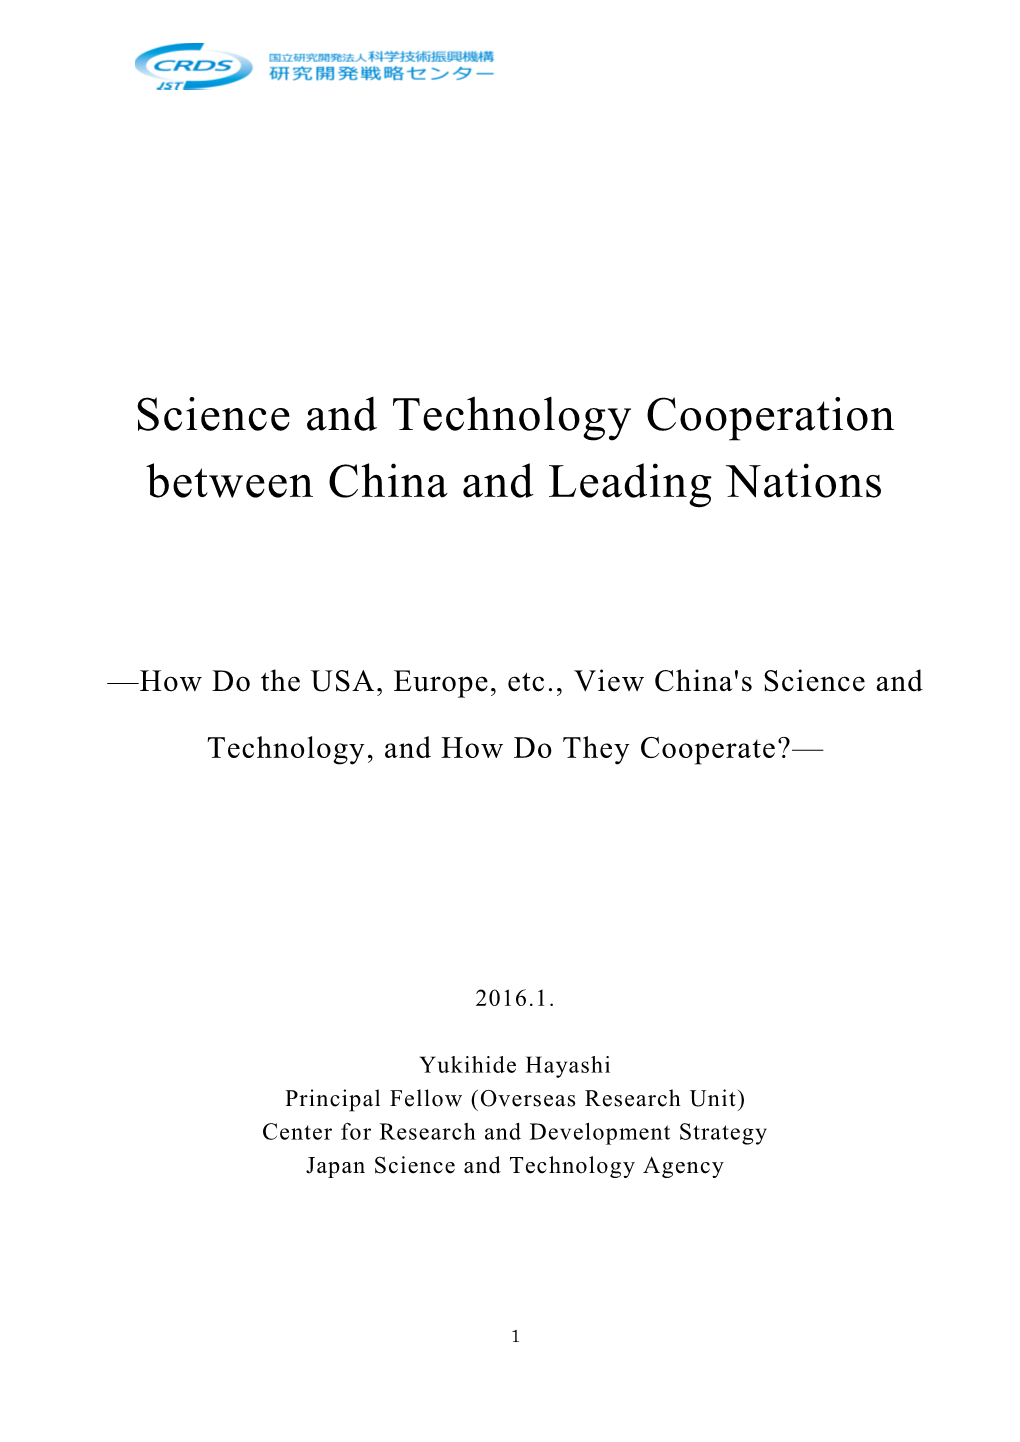 Science and Technology Cooperation Between China and Leading Nations